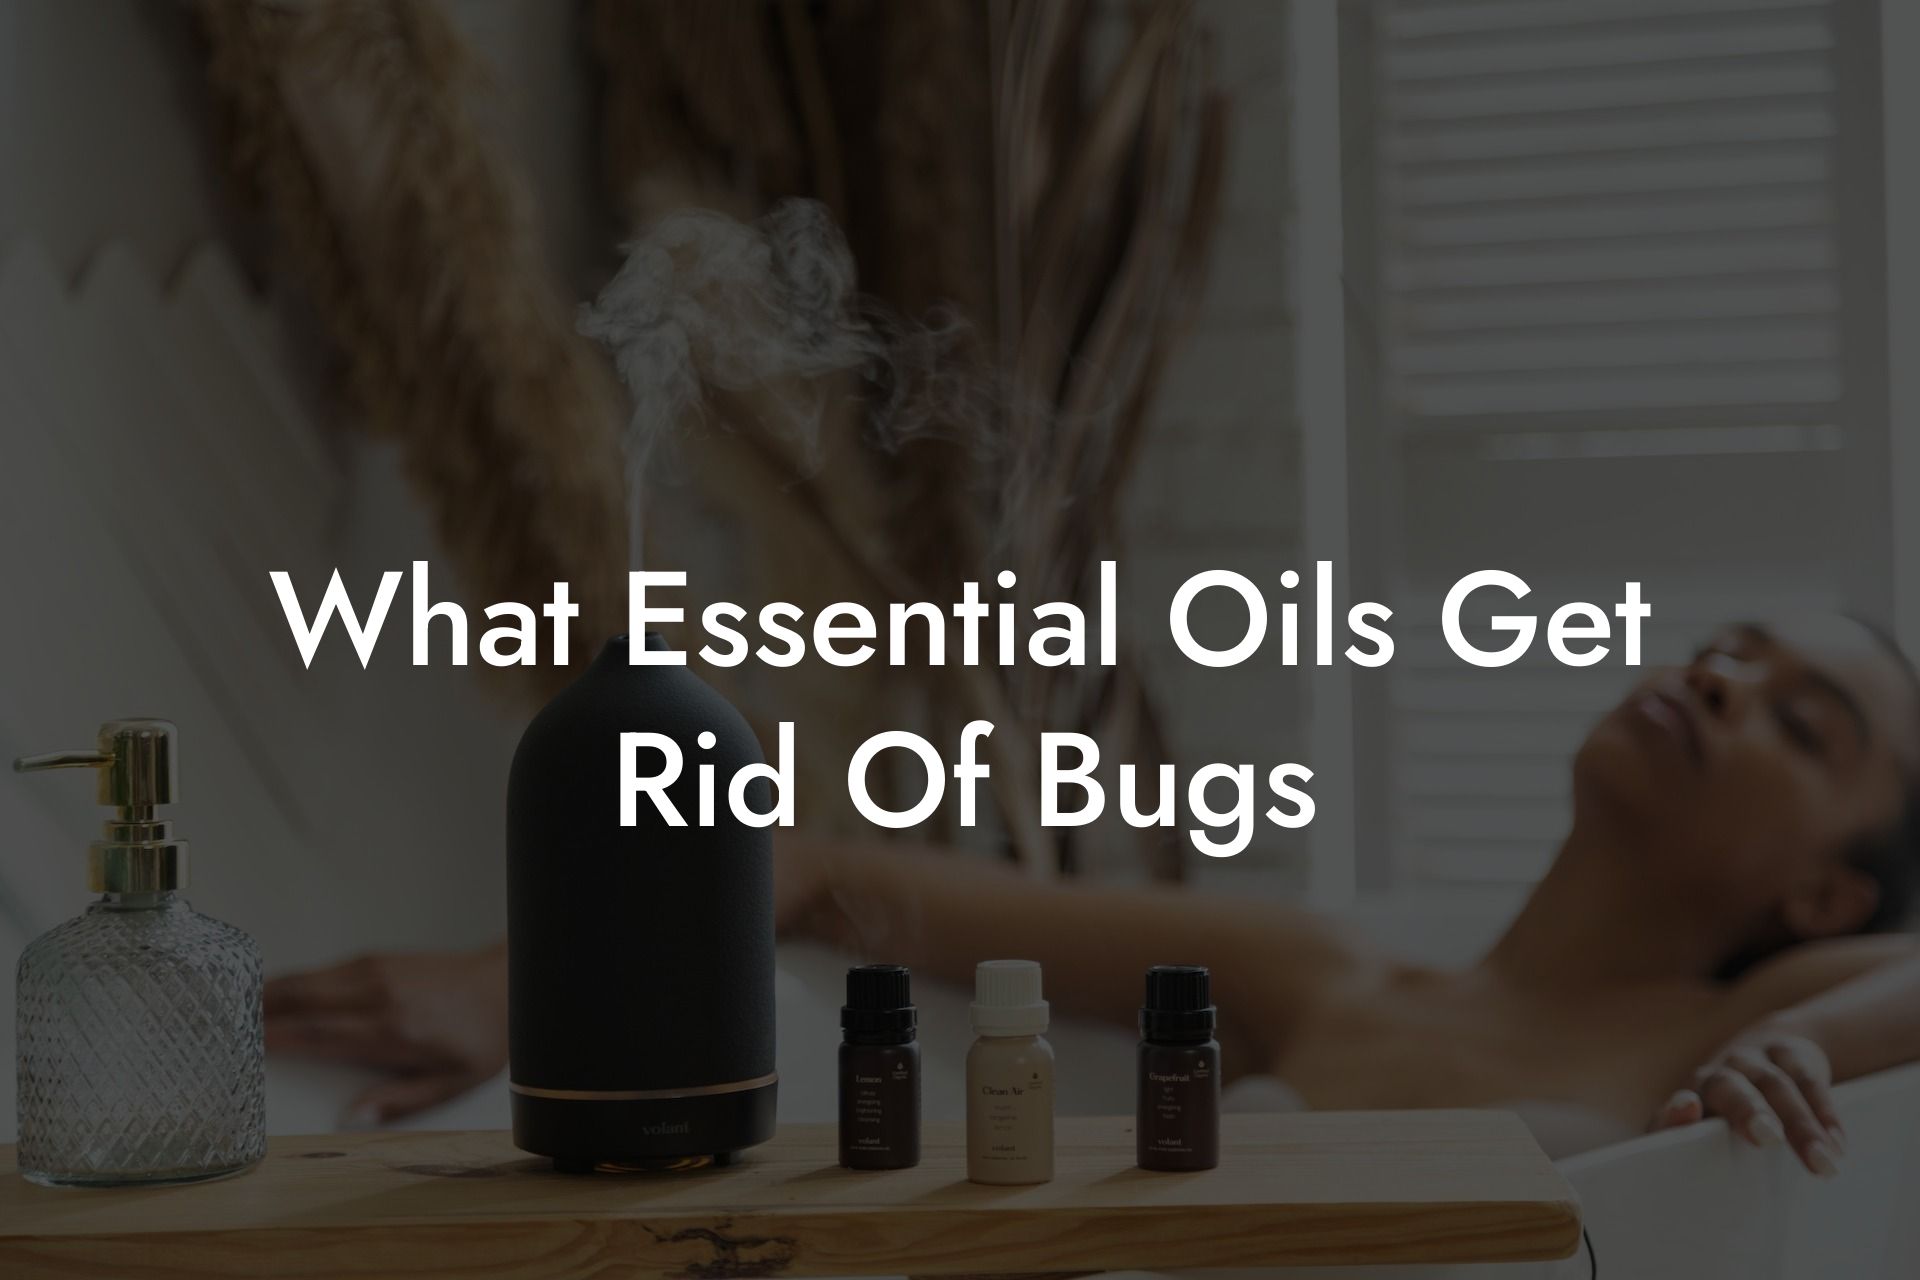 What Essential Oils Get Rid Of Bugs